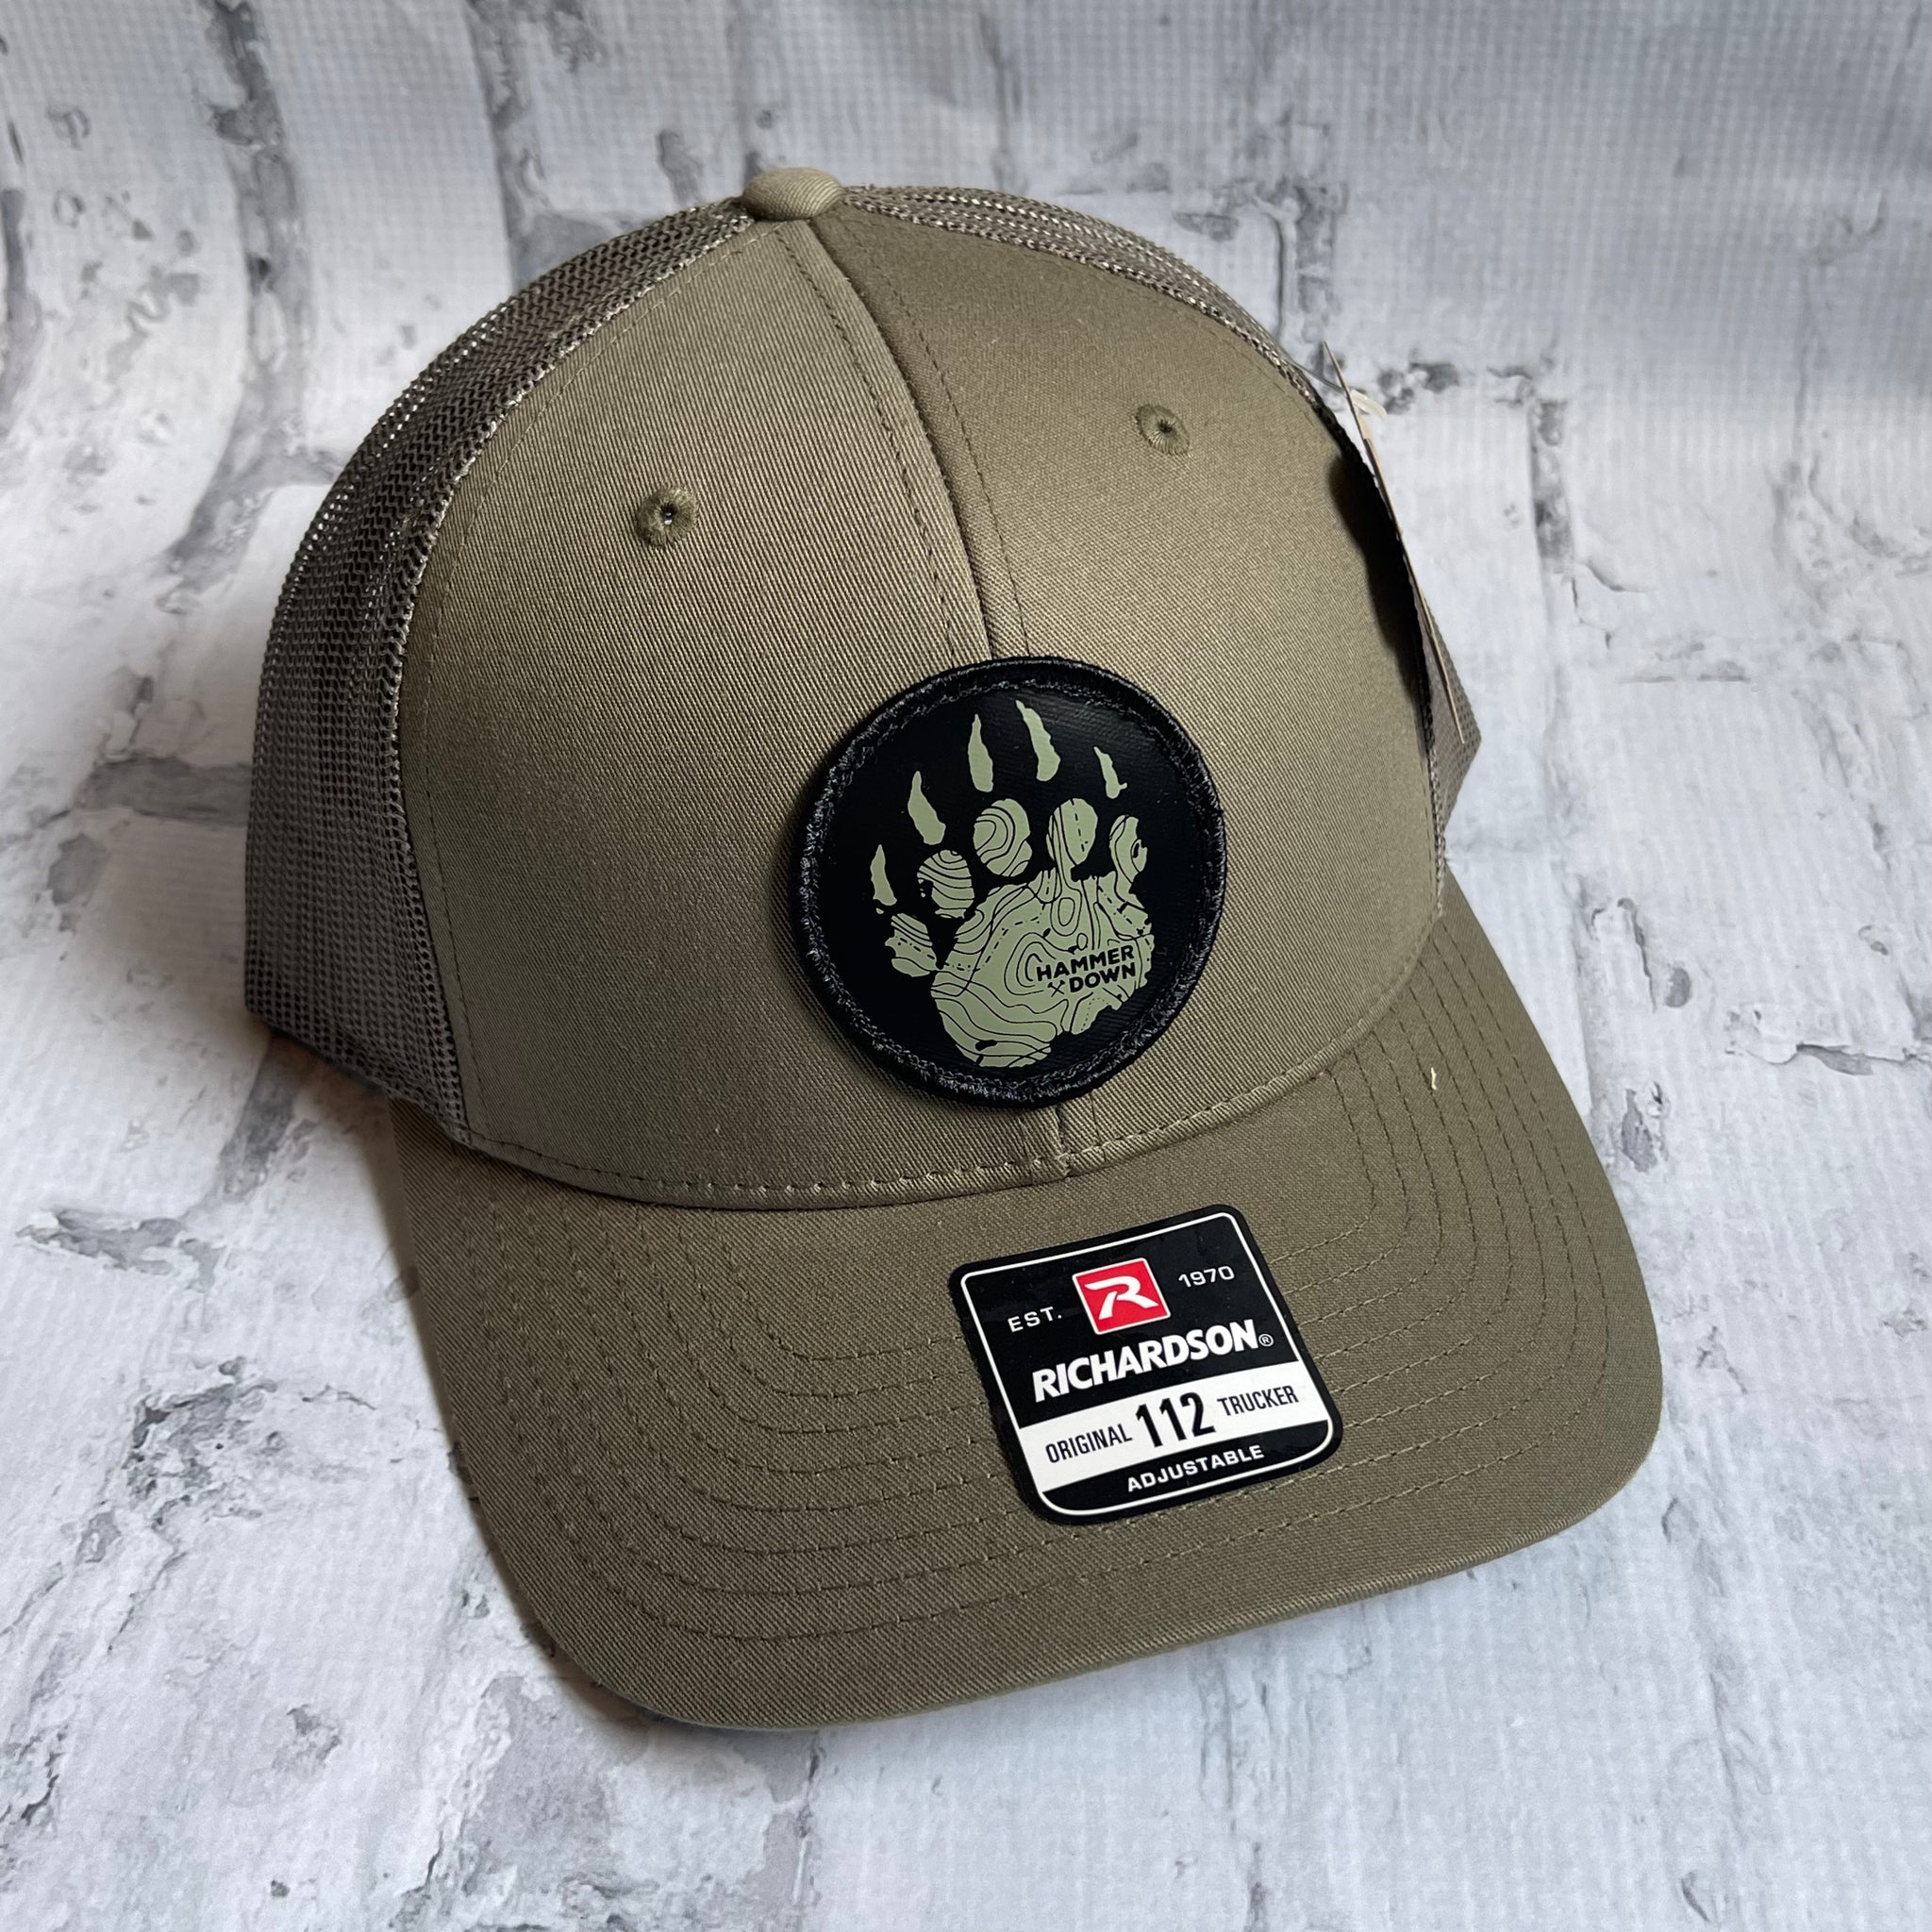 Hammer Down "Bear Claw Topo" Hat - Loden with Woven Patch - Southern Charm "Shop The Charm"